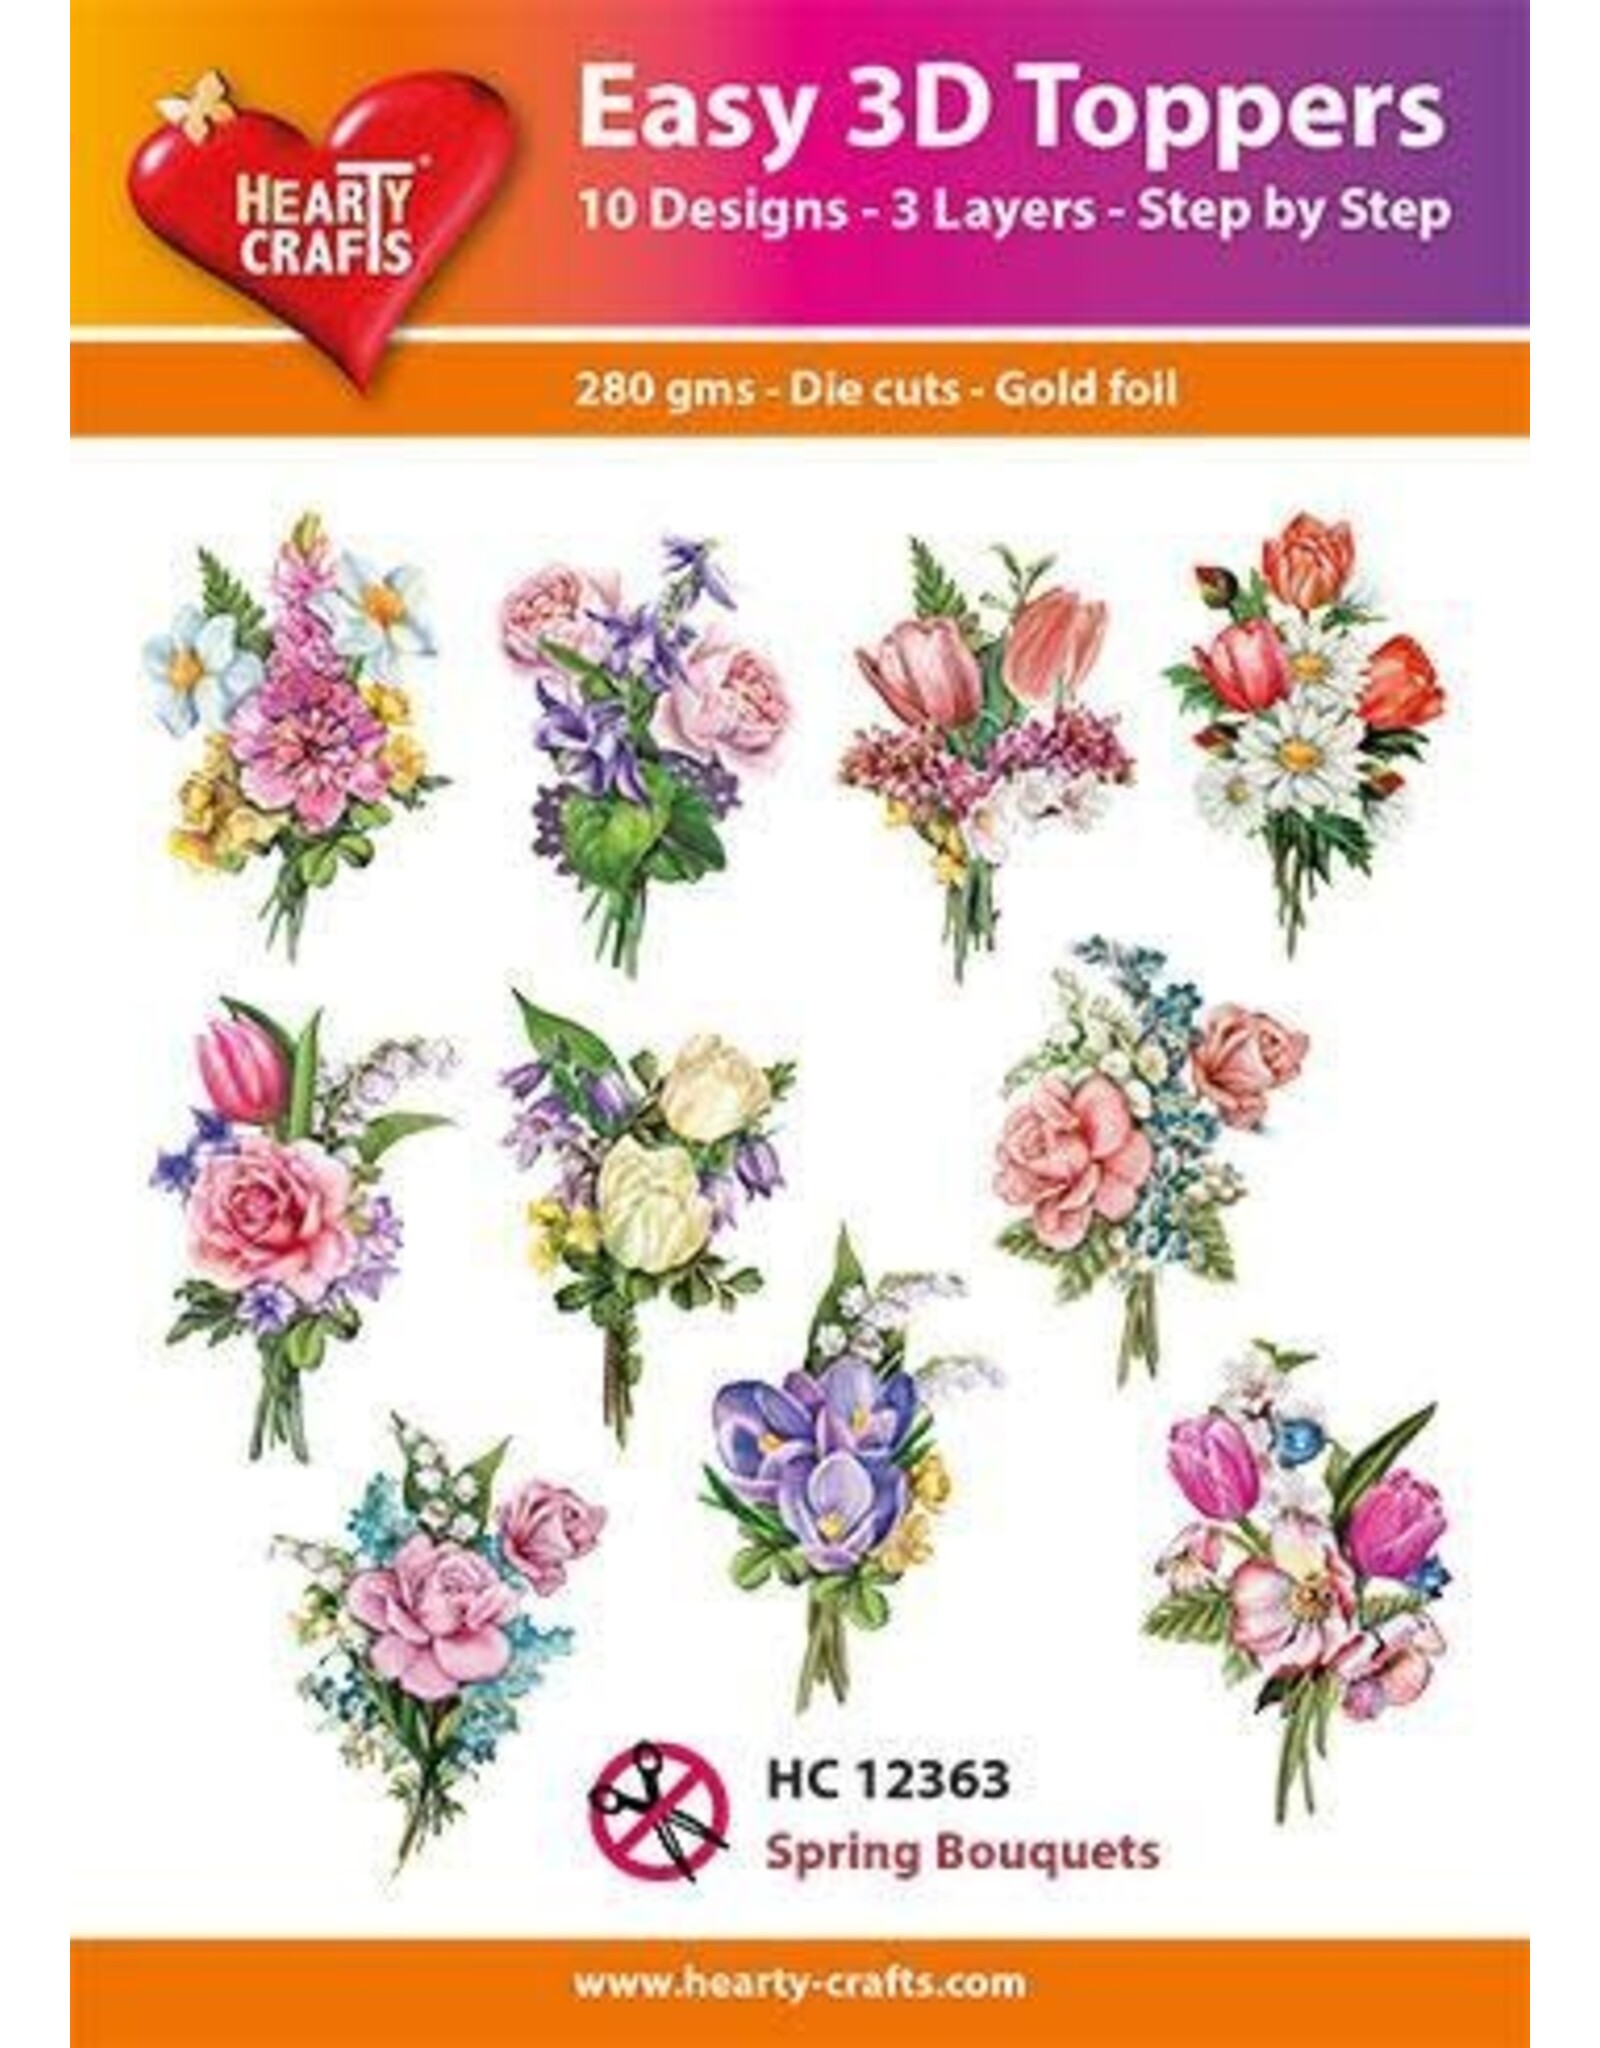 HEARTY CRAFTS HEARTY CRAFTS SPRING BOUQUETS EASY 3D TOPPERS